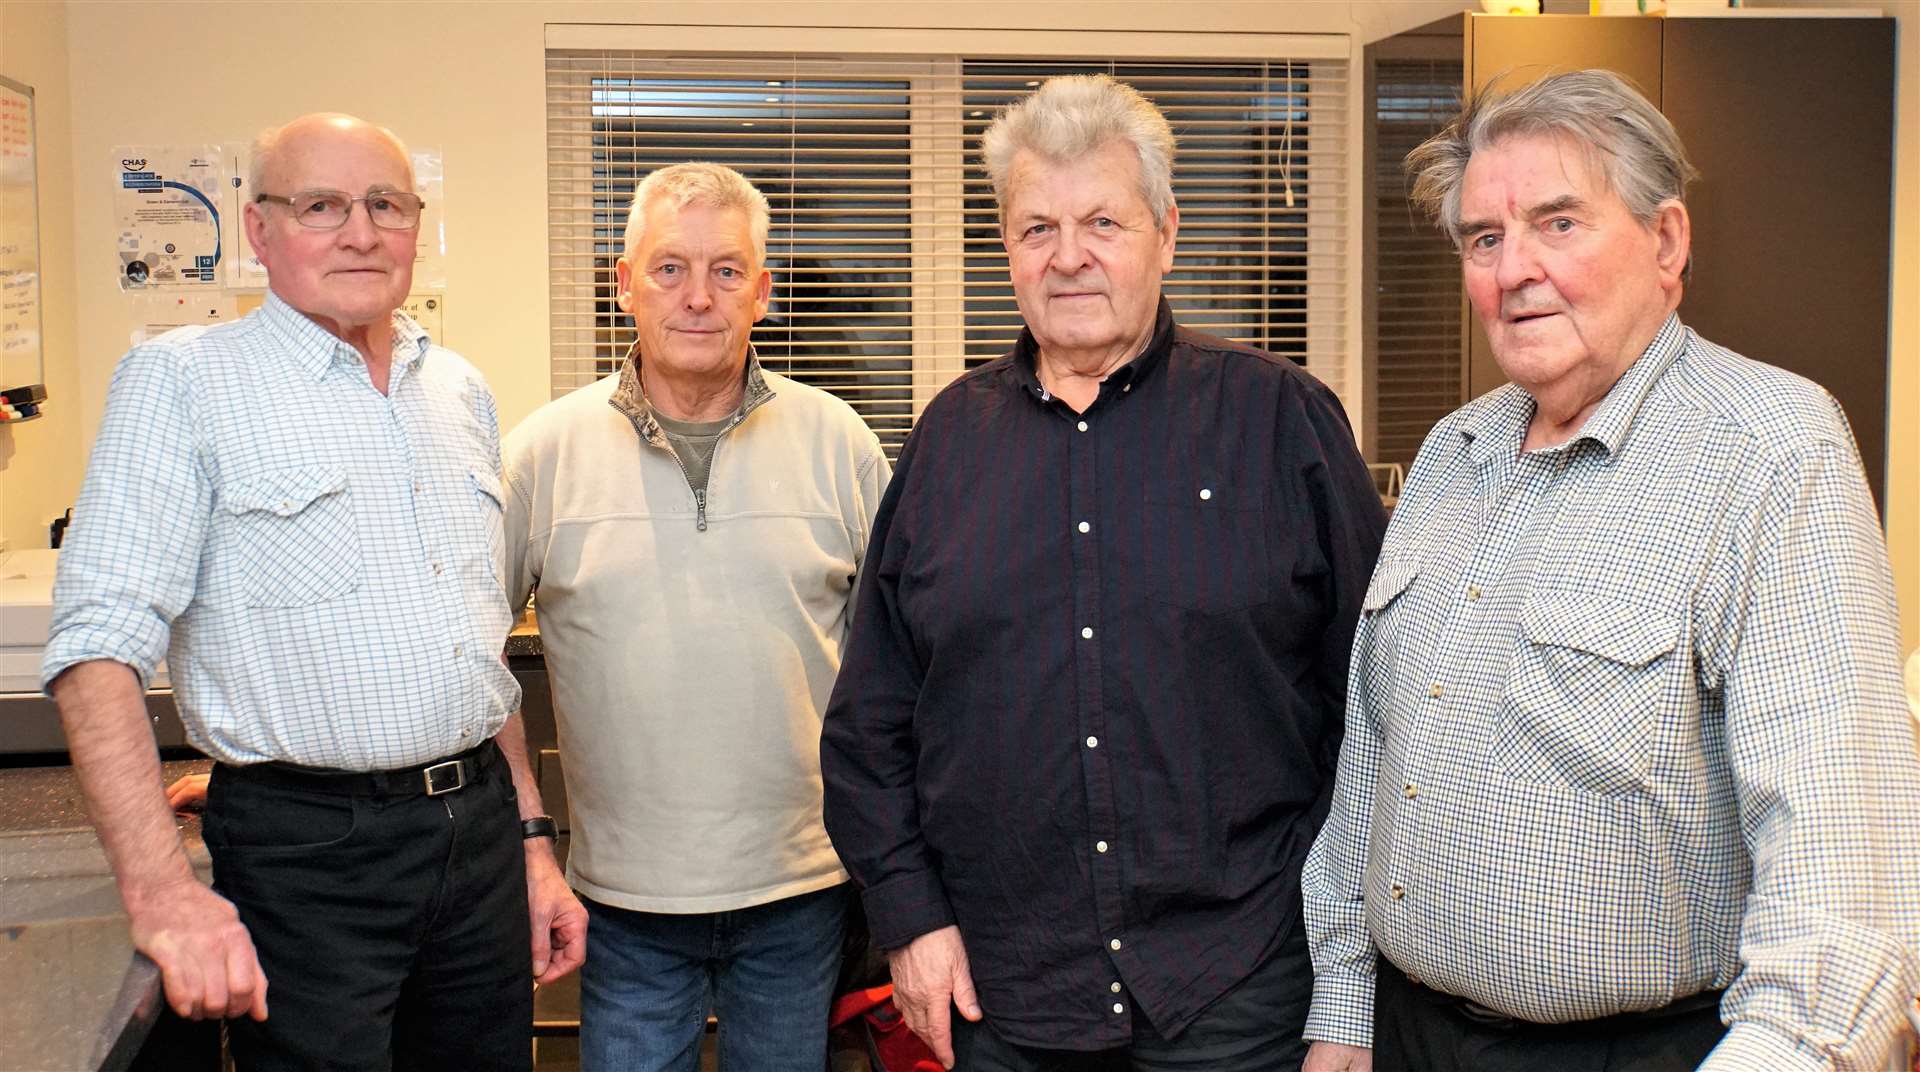 The vintage car club committee consists of Bert Cooper (safety officer and committee member), Les Bremner (committee member), David Green (treasurer) and Bert Macleod (chairman). Picture: DGS